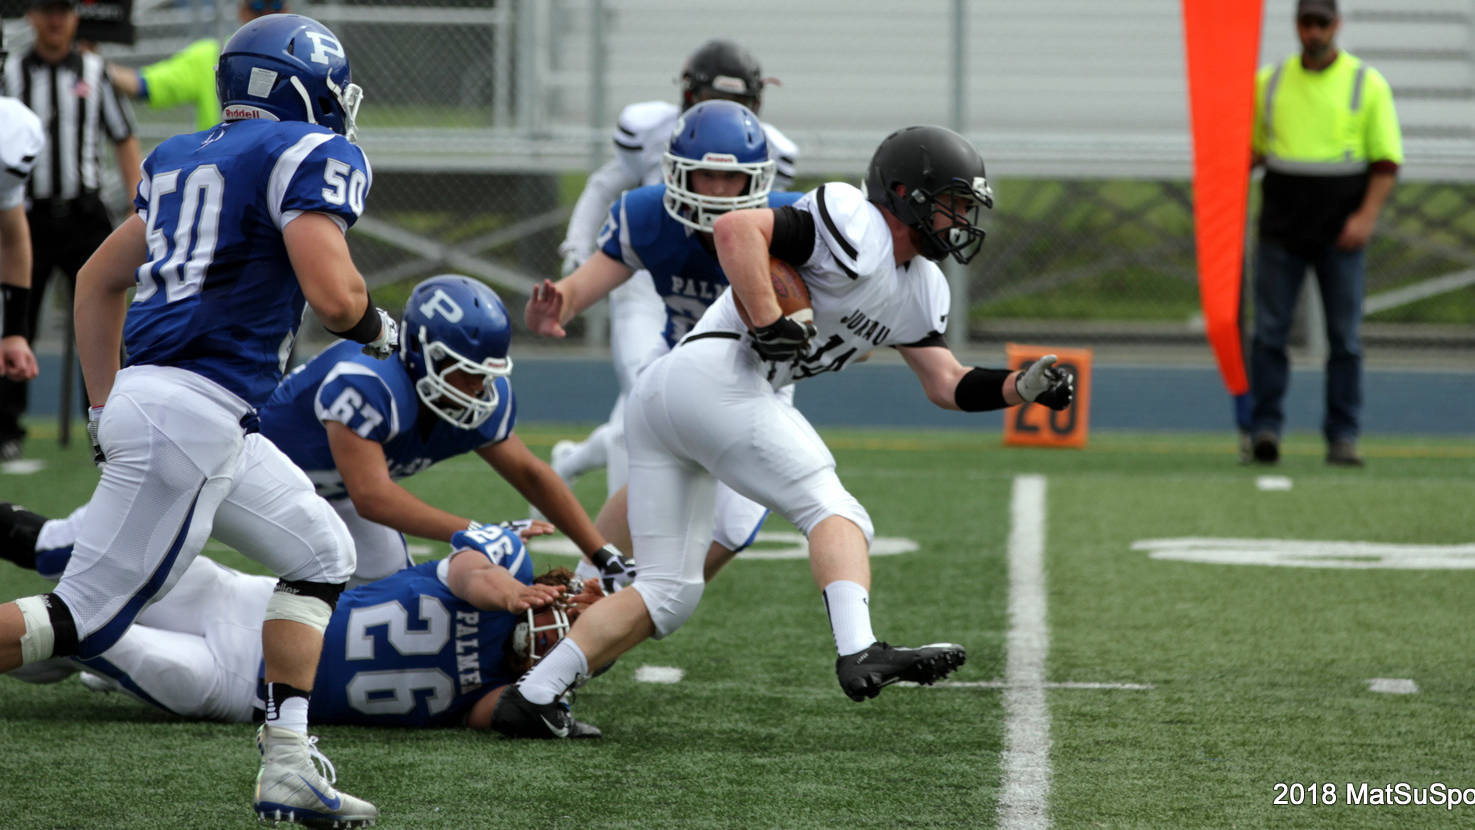 Juneau running back Caleb Traxler breaks a Palmer tackle in his team’s 31-8 loss to the Moose in its first game of the season last Saturday. The co-op team plays West Anchorage on Saturday night in Anchorage. (Courtesy Photo | MatSuSports.net)